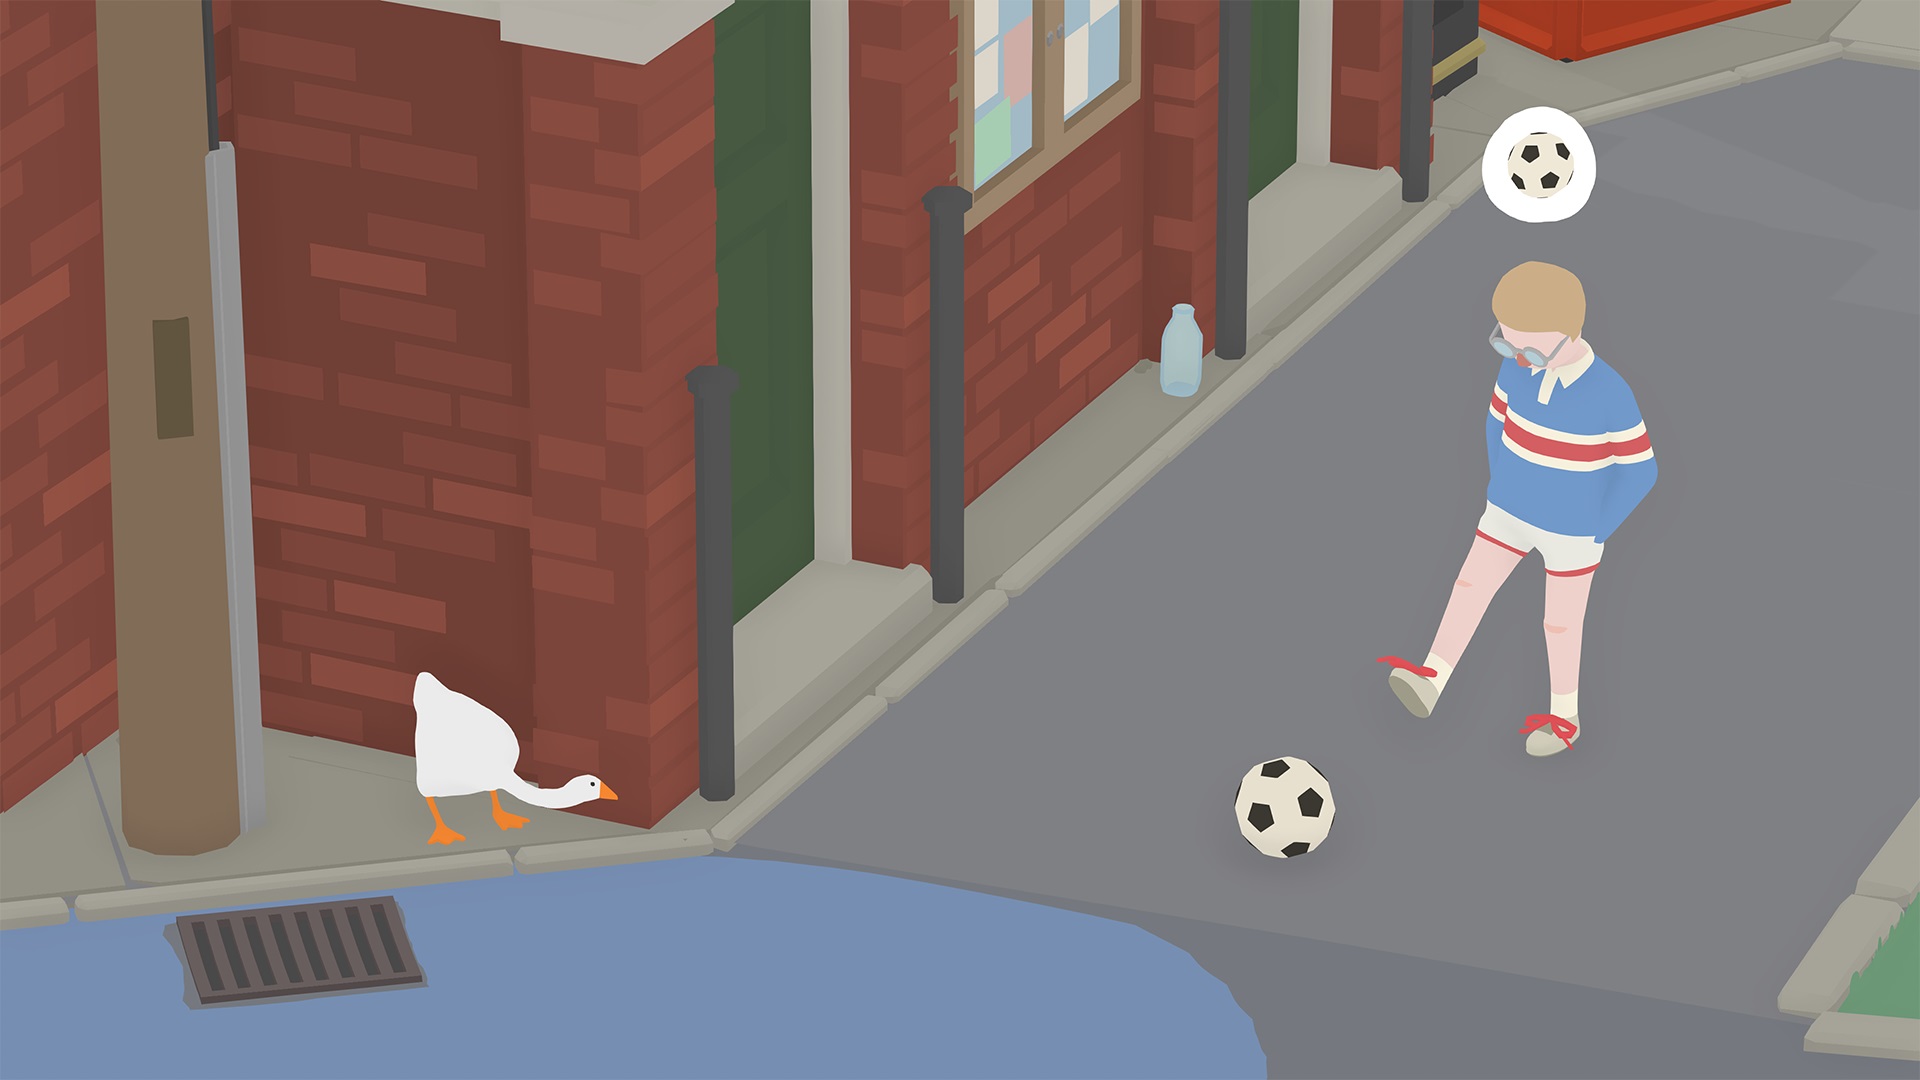 Untitled Goose Game - a child kicks a soccer ball slowly down a street. A goose is waiting to ambush him with honks.